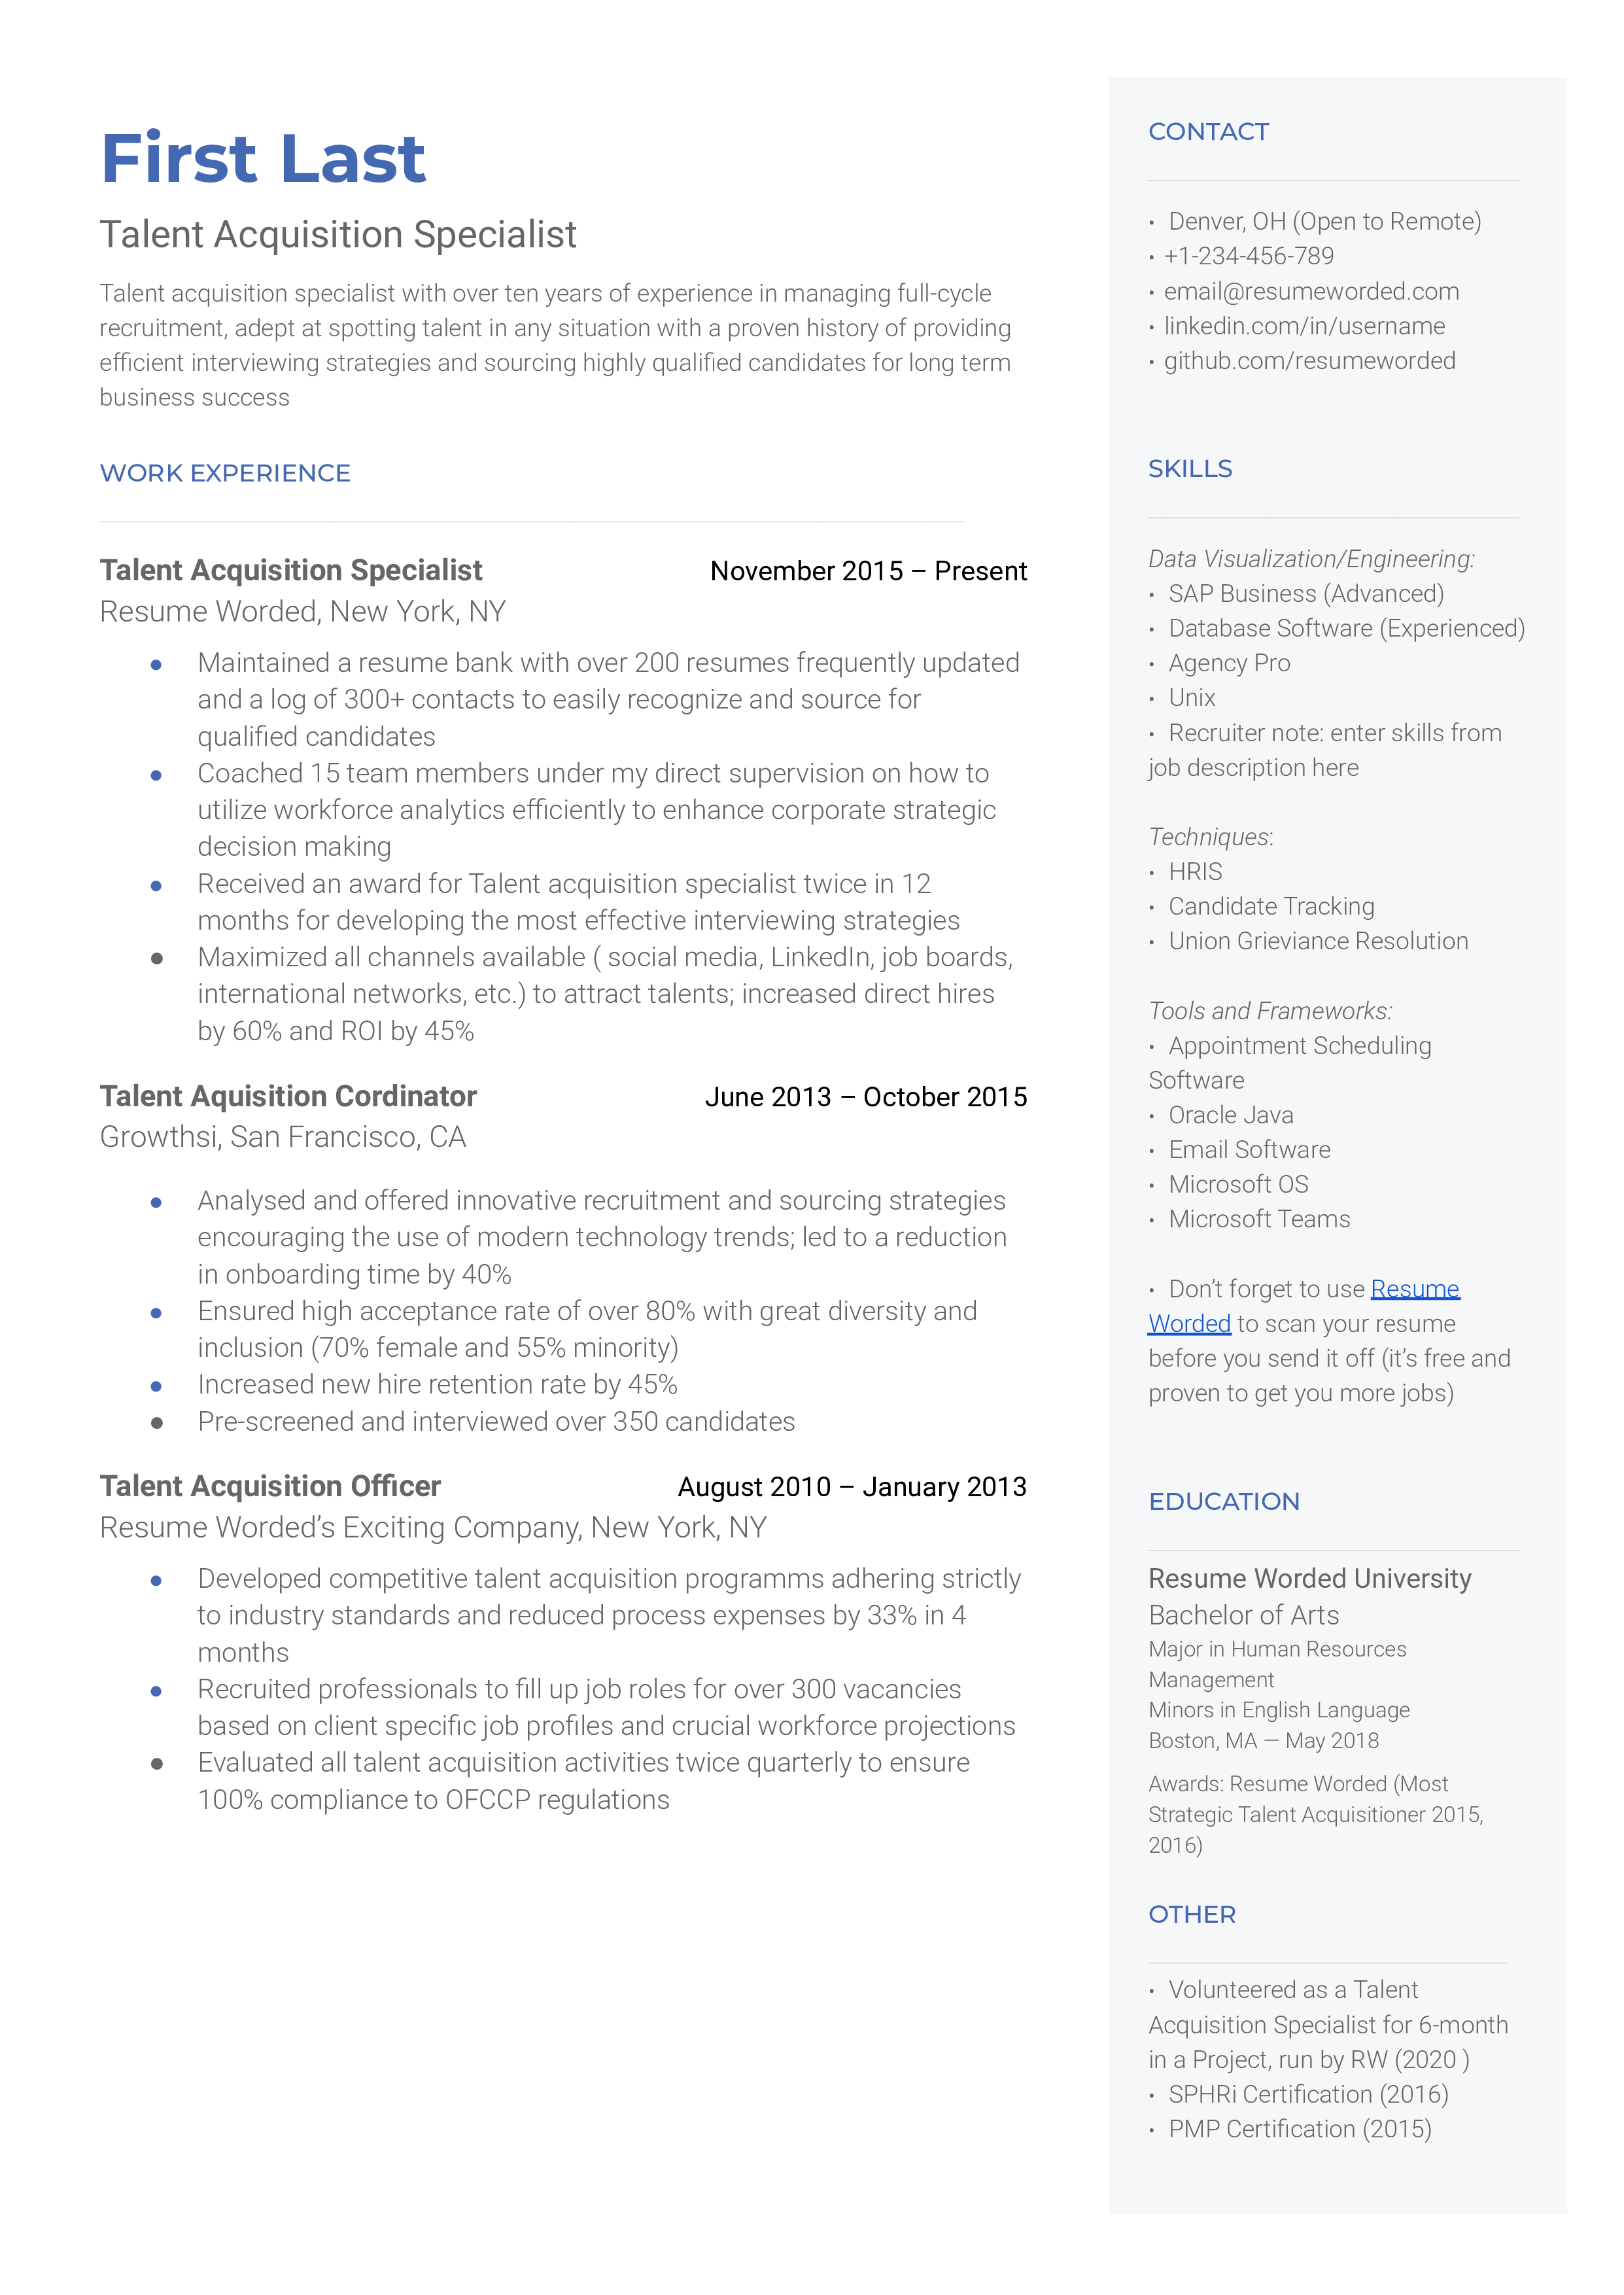 Talent Acquisition Specialist Resume Sample